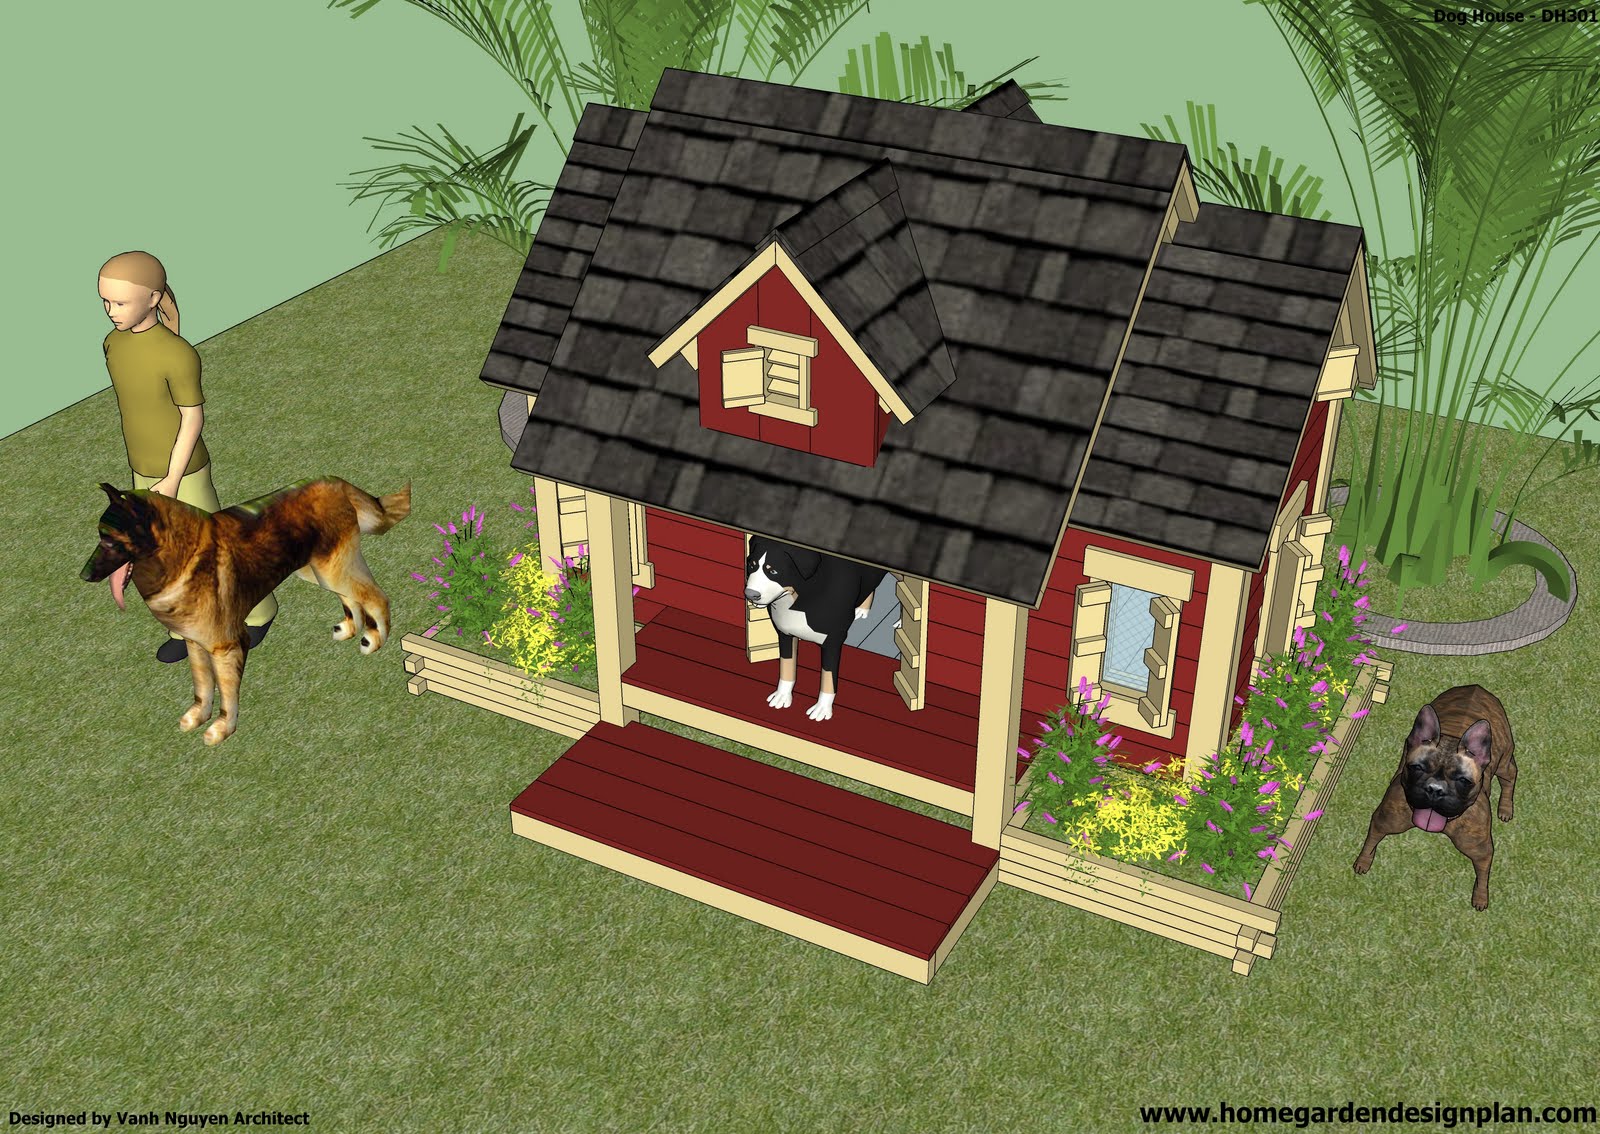  Dog House Plans - How to Build an Insulated Dog House - Free Dog House